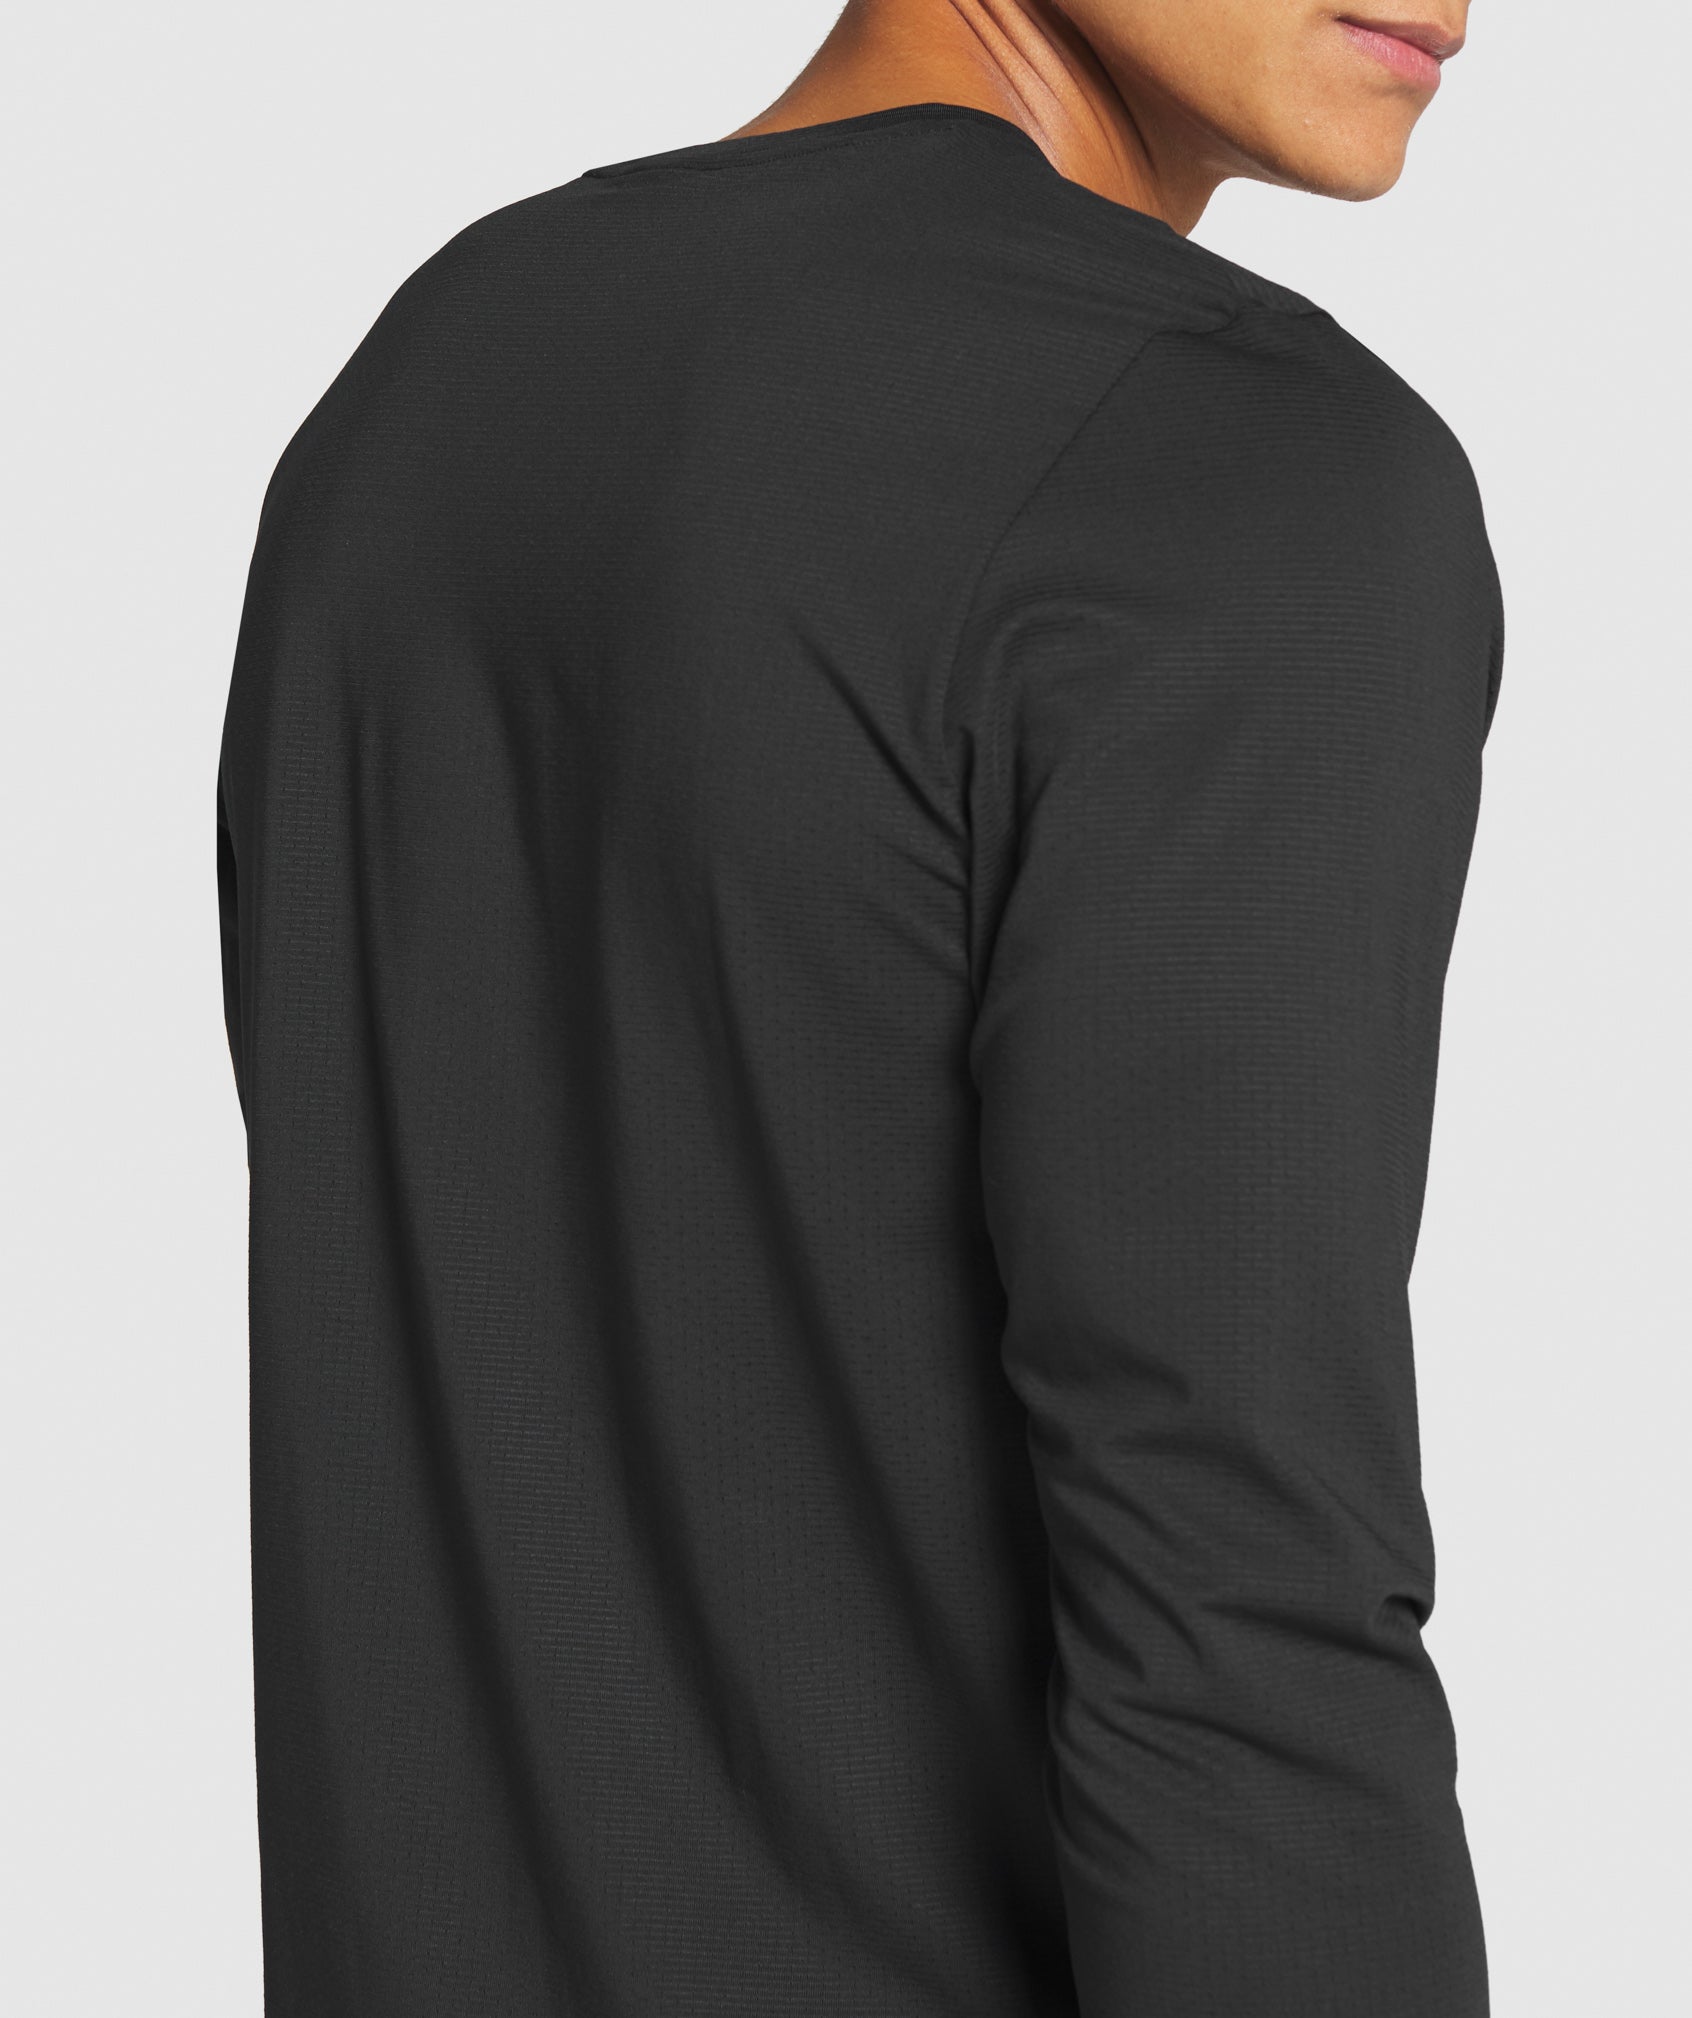 Arrival Long Sleeve T-Shirt in Black